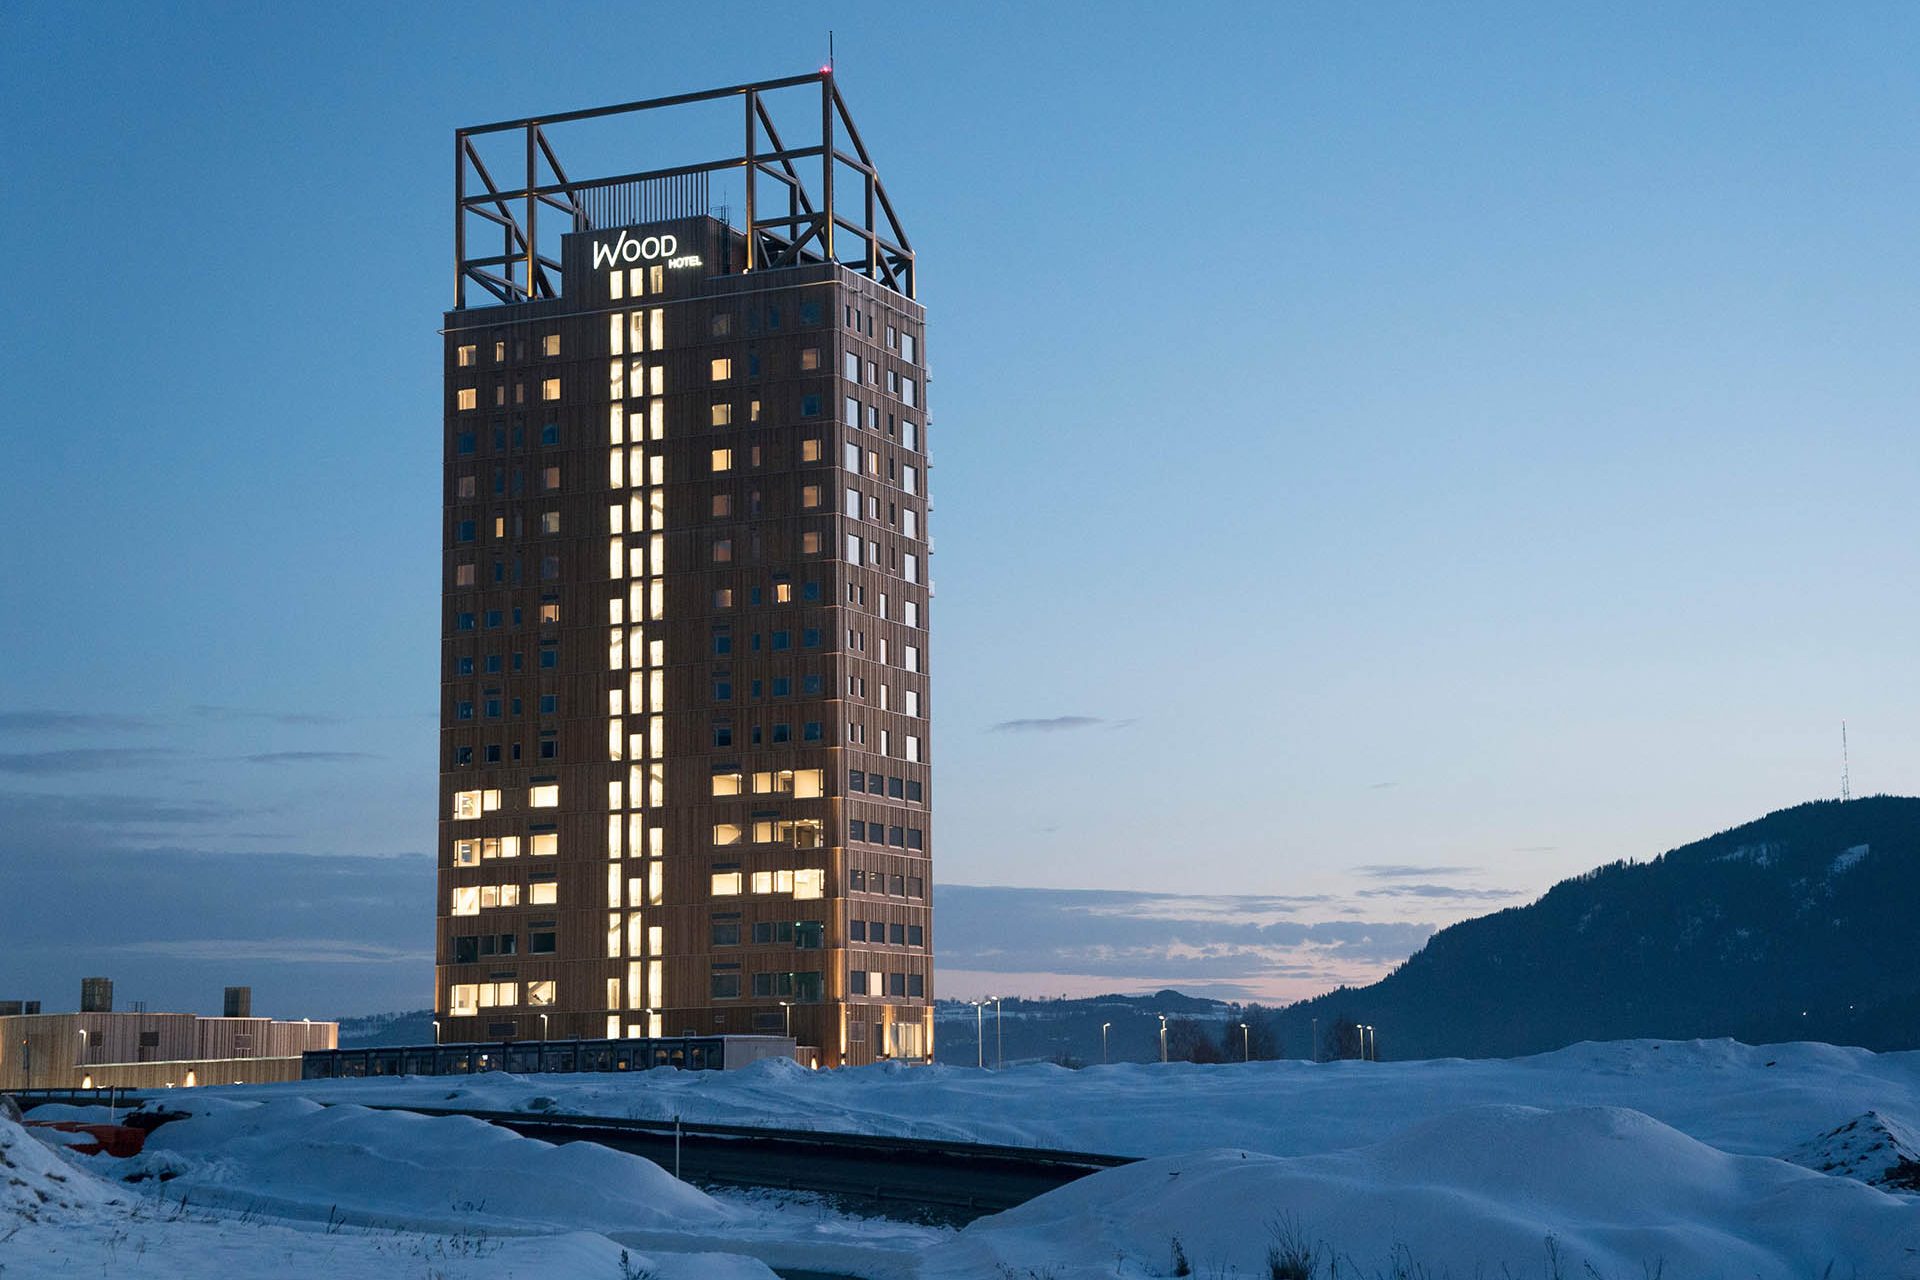 <p>Mjøstårnet was inaugurated in 2019 in the city of Brumunddal and has a height almost the same as that of the Ascent, with 85.4 meters or 280 feet, although, in this case, with 18 floors in which there is a hotel, apartments, offices and an indoor pool. It was designed by the Norwegian studio Voll Arkitekter for AB Invest, and Moelven Limtre installed its wooden structure.</p>